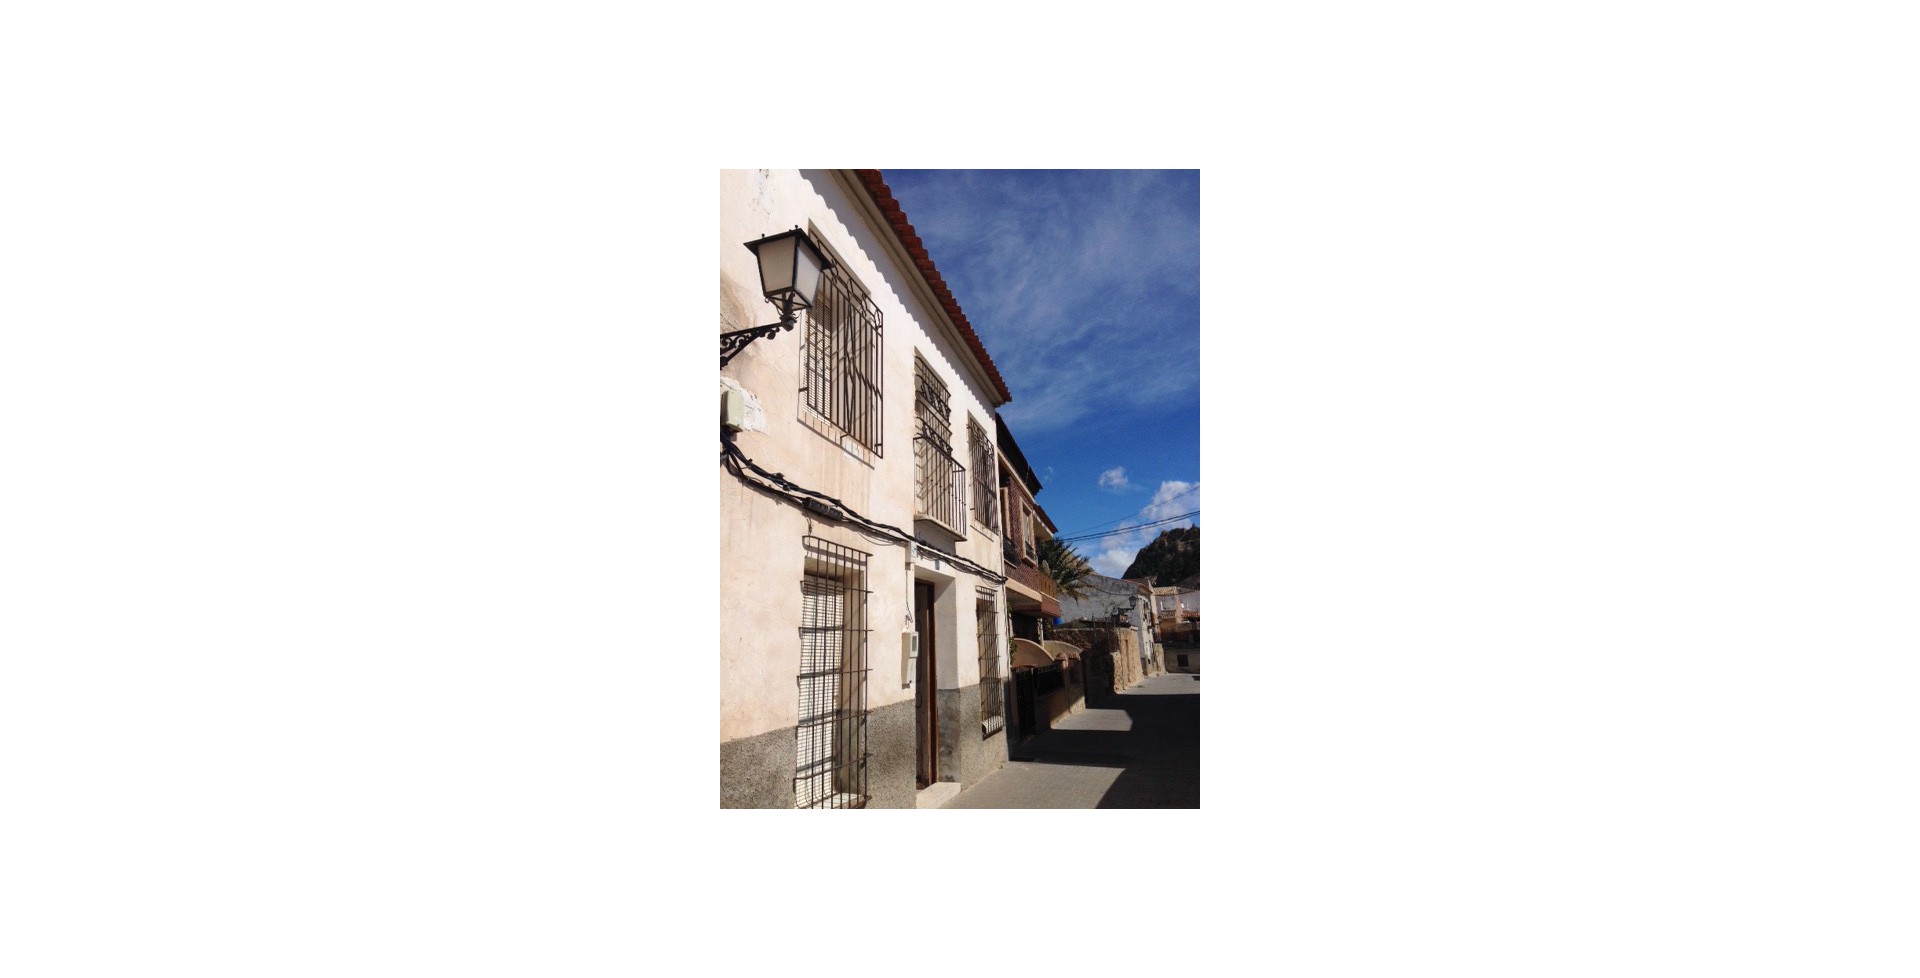 Large double fronted character town House, Ricote, Murcia, Spain